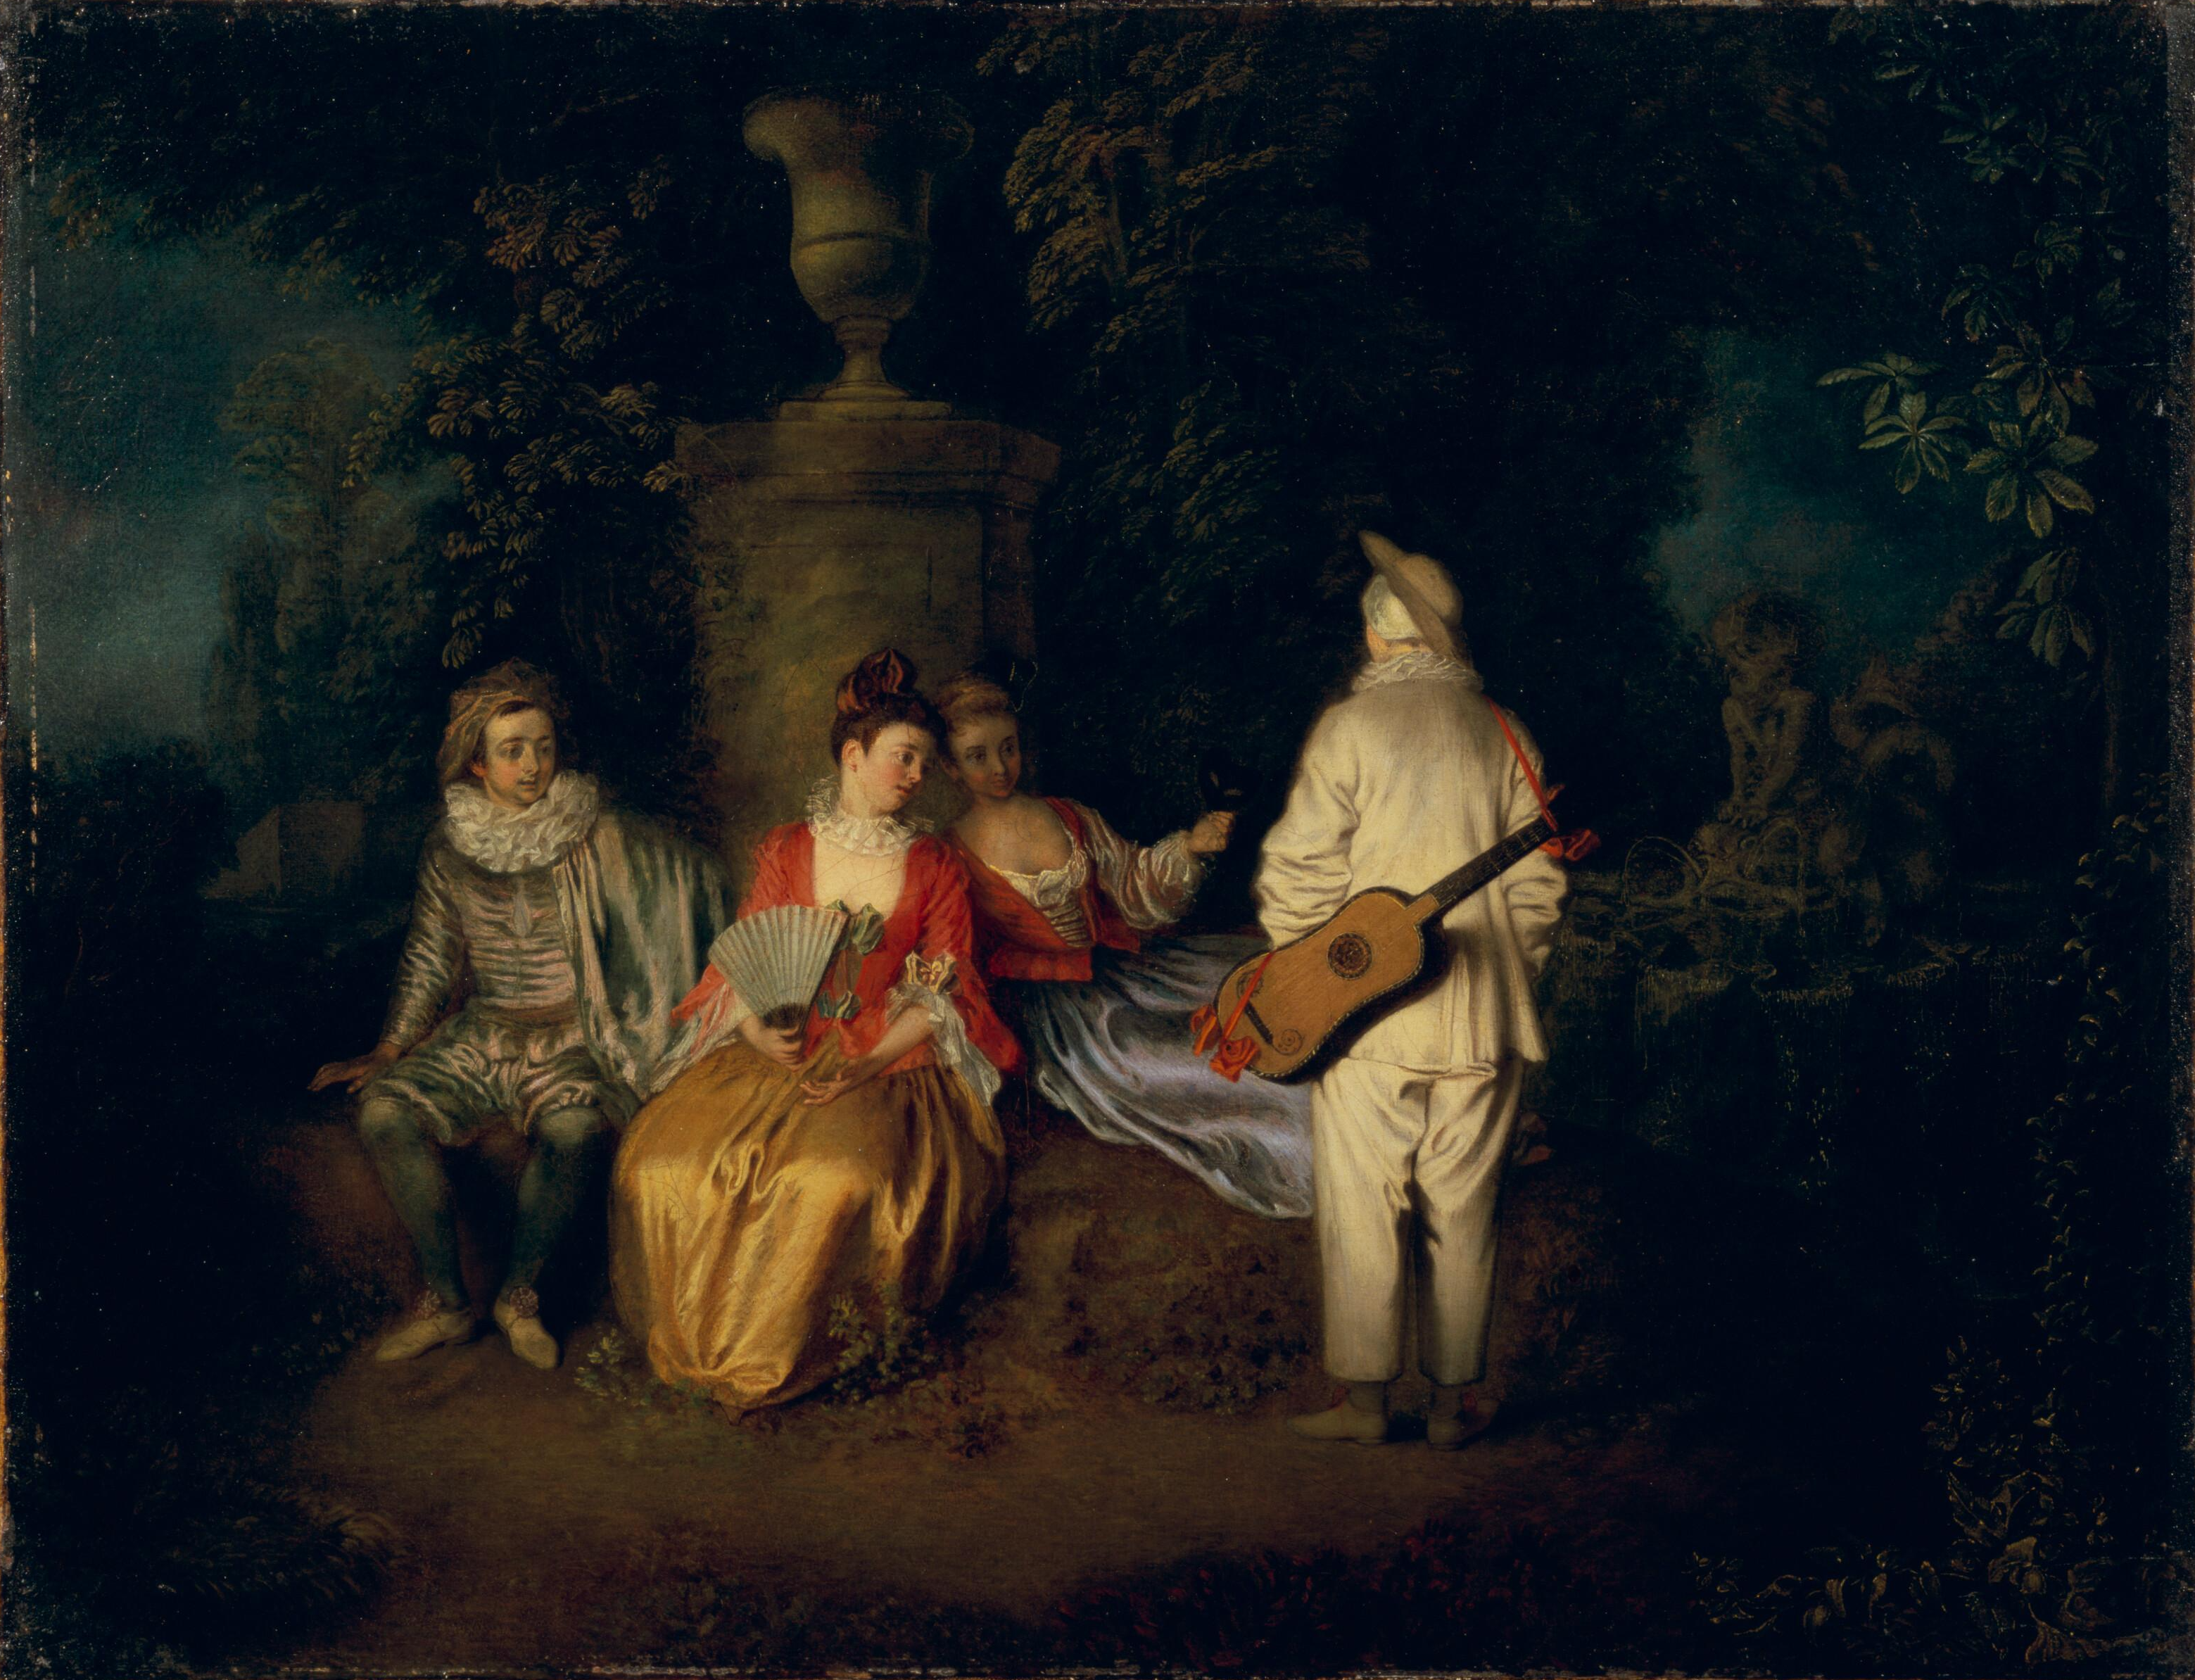 The Foursome by Antoine Watteau - c. 1713 - 49.5 x 62.9 cm Legion of Honor